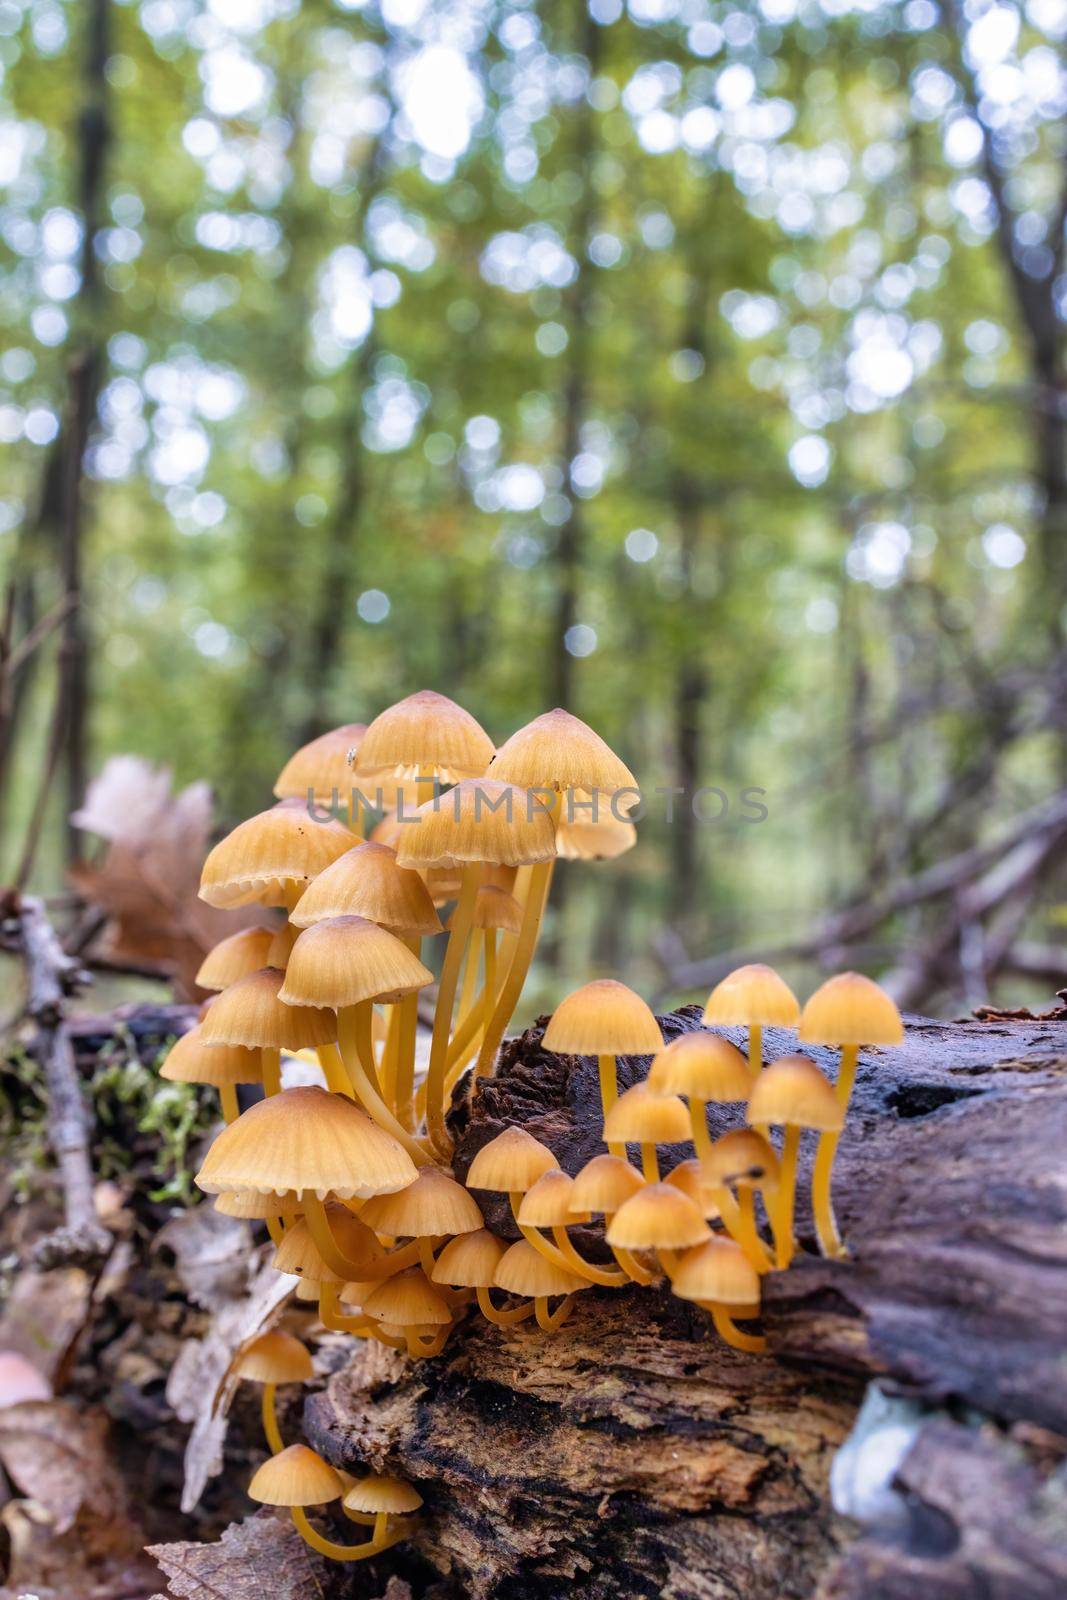 A group of mushrooms on a trunk in autumn in the forest by Digoarpi